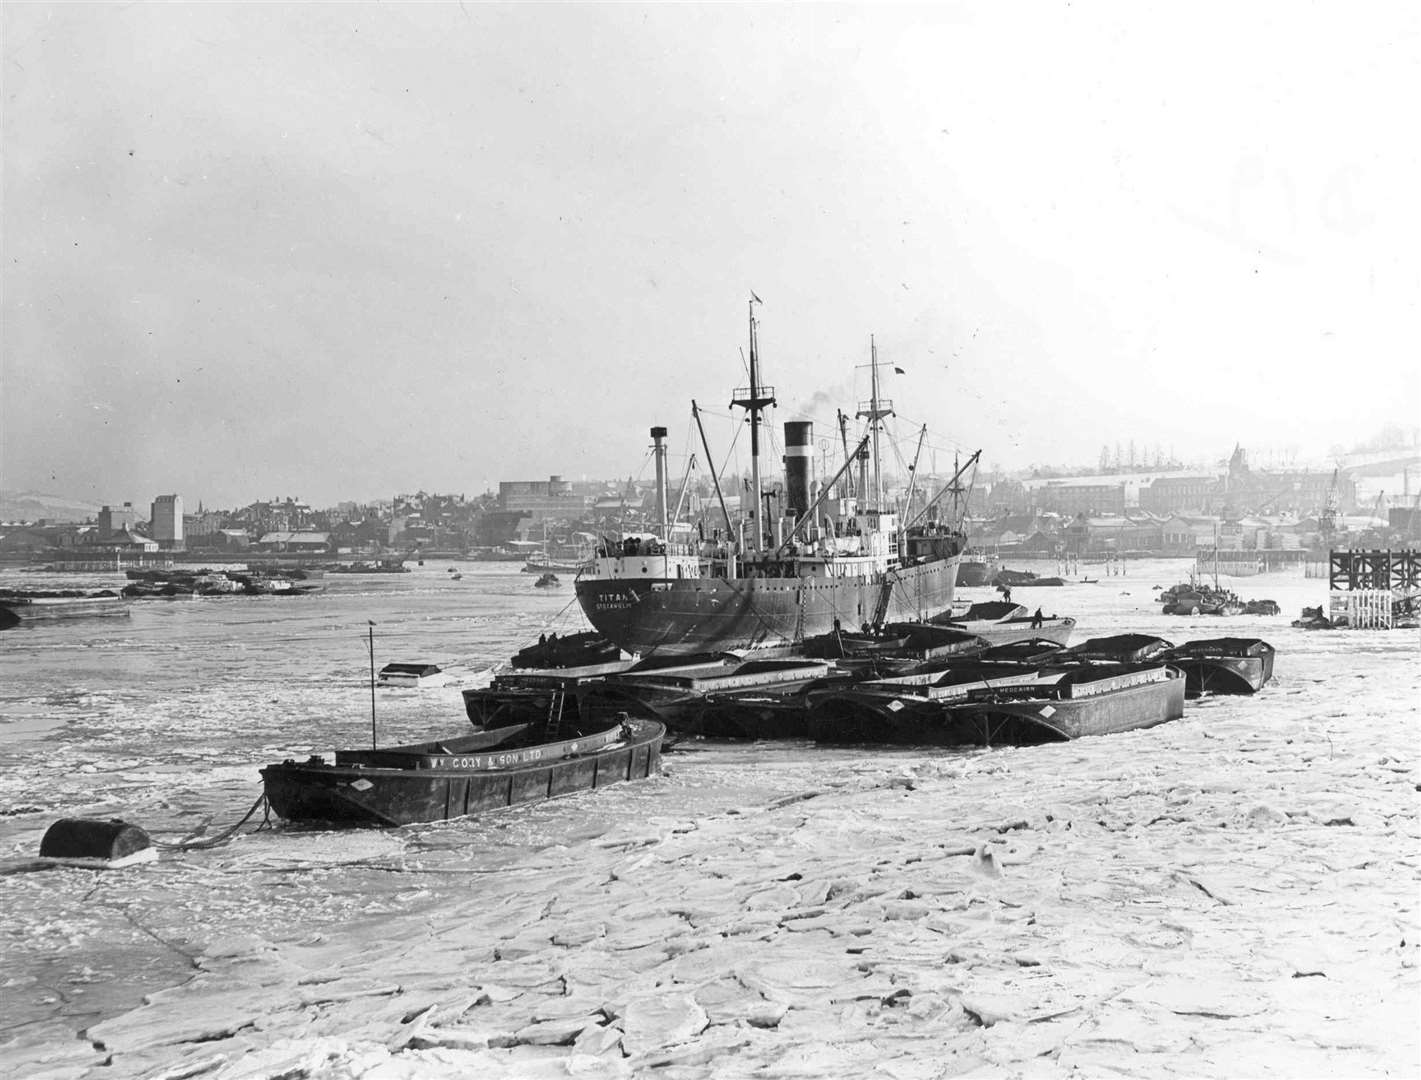 The winter of early 1963 was so severe that coal barges were frozen on the River Medway